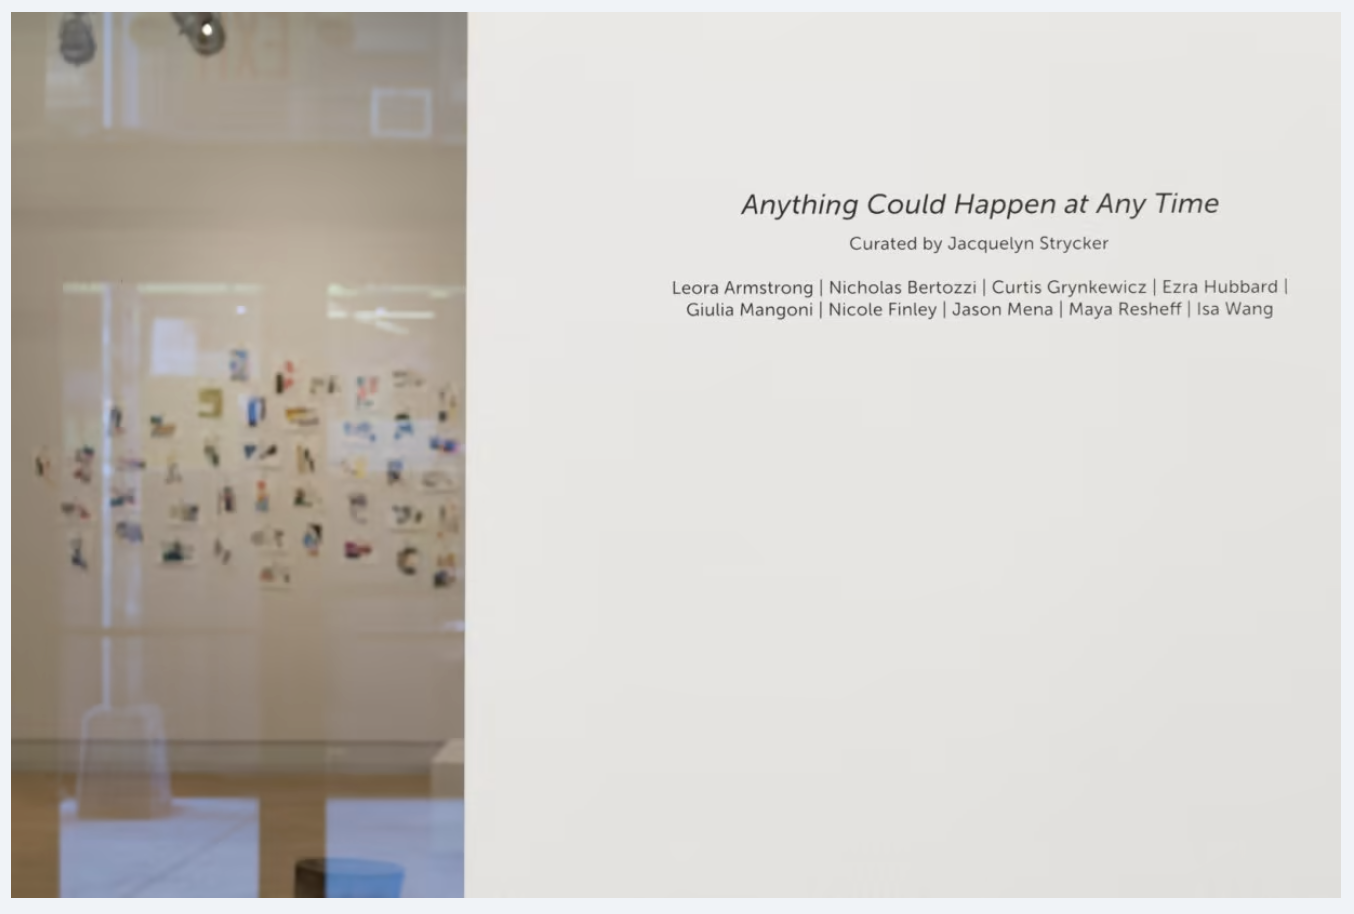 "Anything Could Happen at Any Time" Curated by Jacquelyn Strycker 